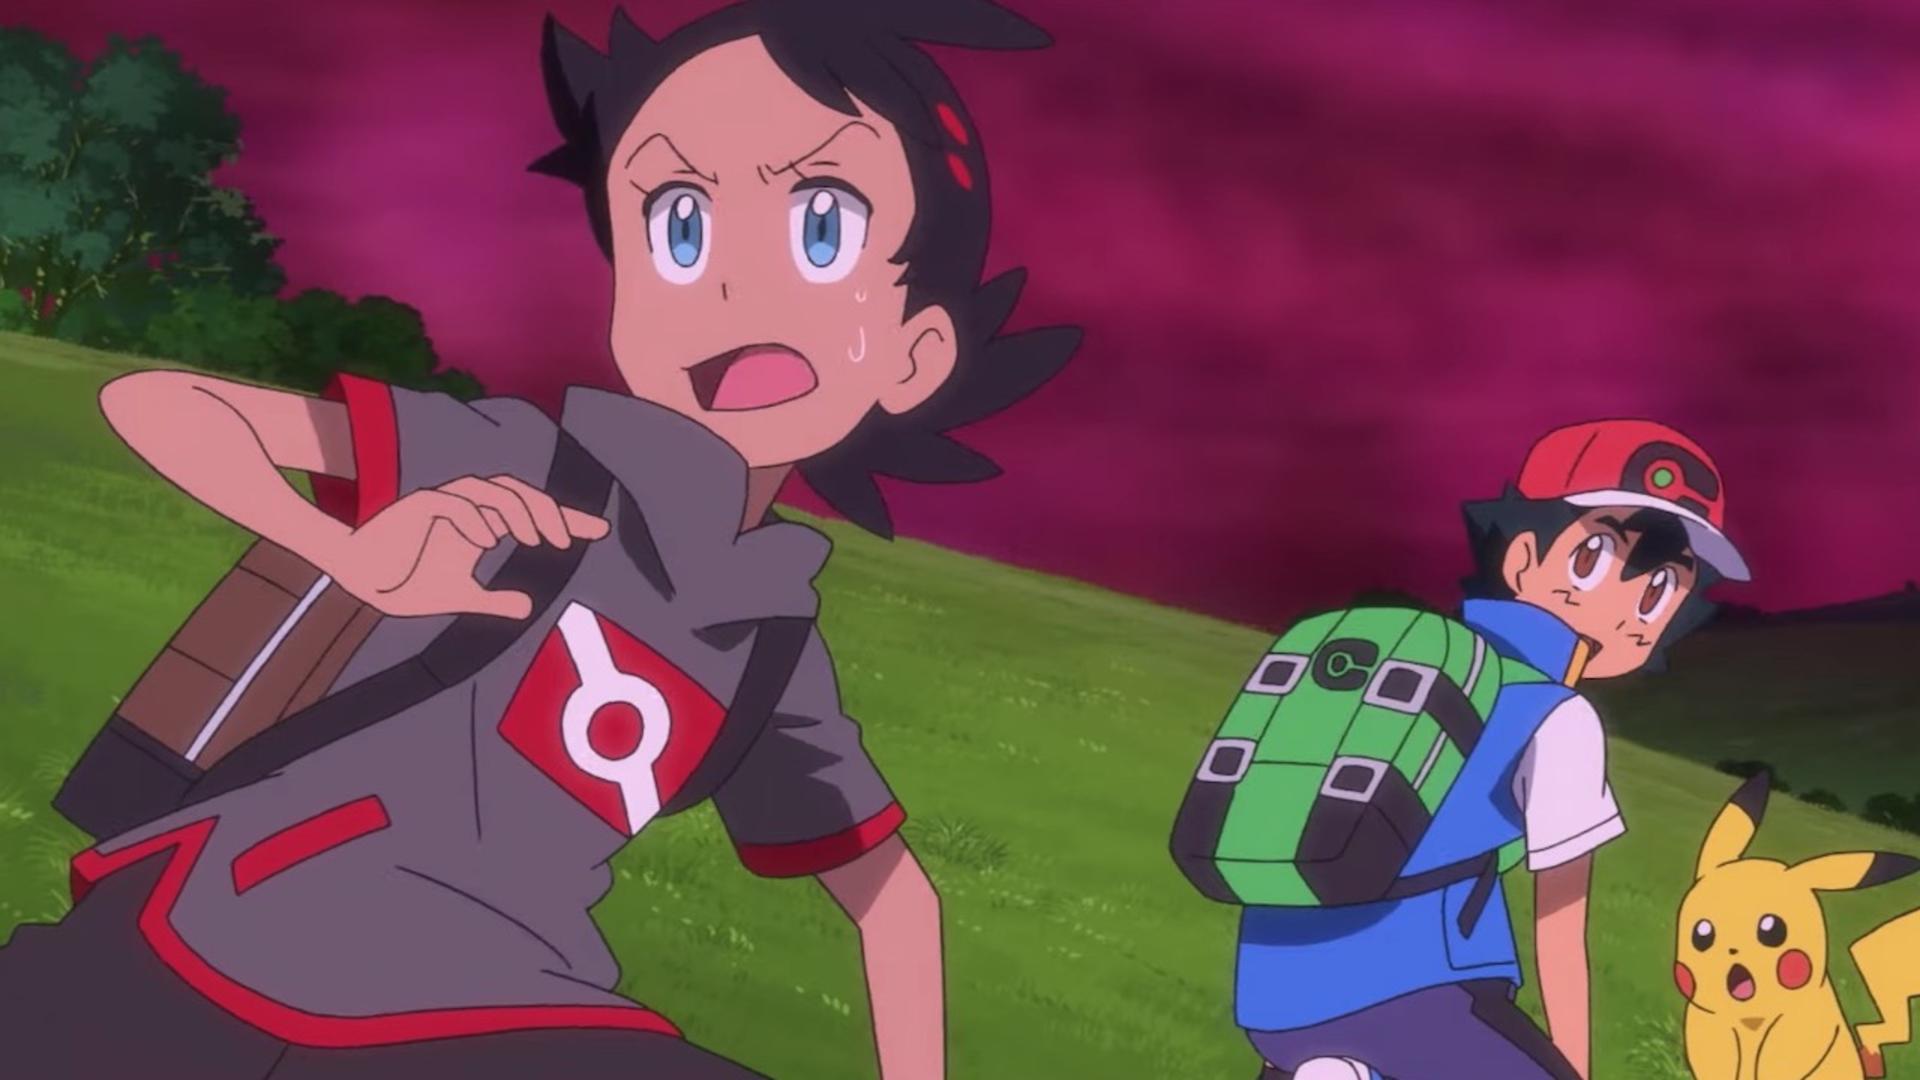 You'll Be Able to Watch Pokemon's Newest Anime Series on Netflix